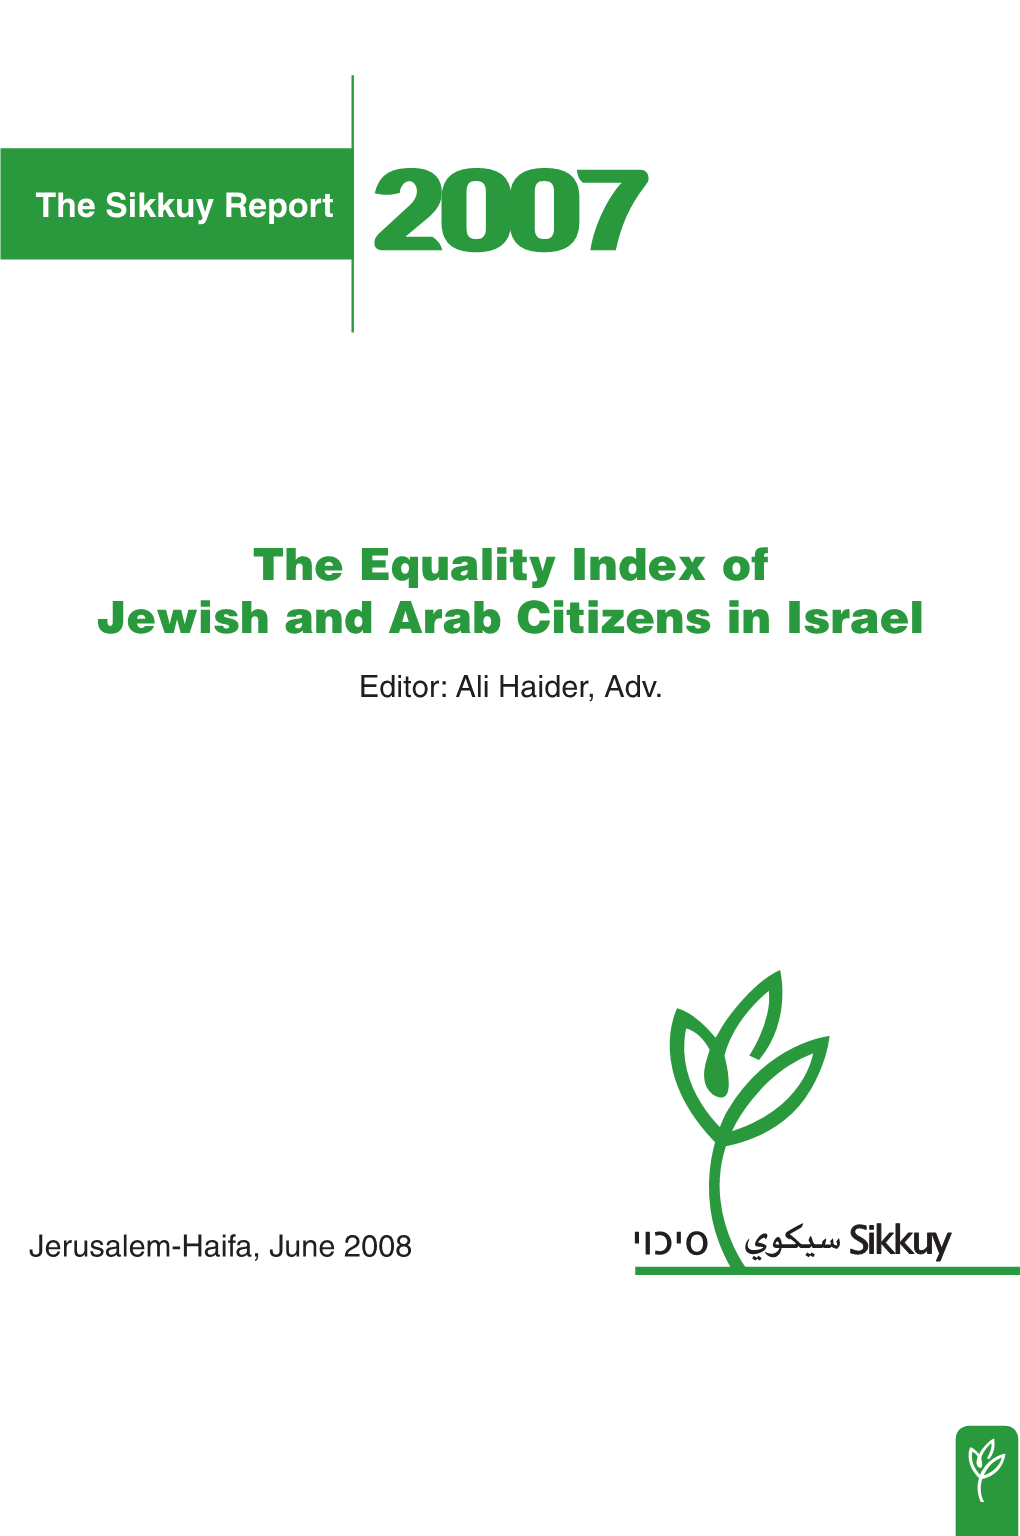 The Equality Index of Jewish and Arab Citizens in Israel the Sikkuy Report 2007